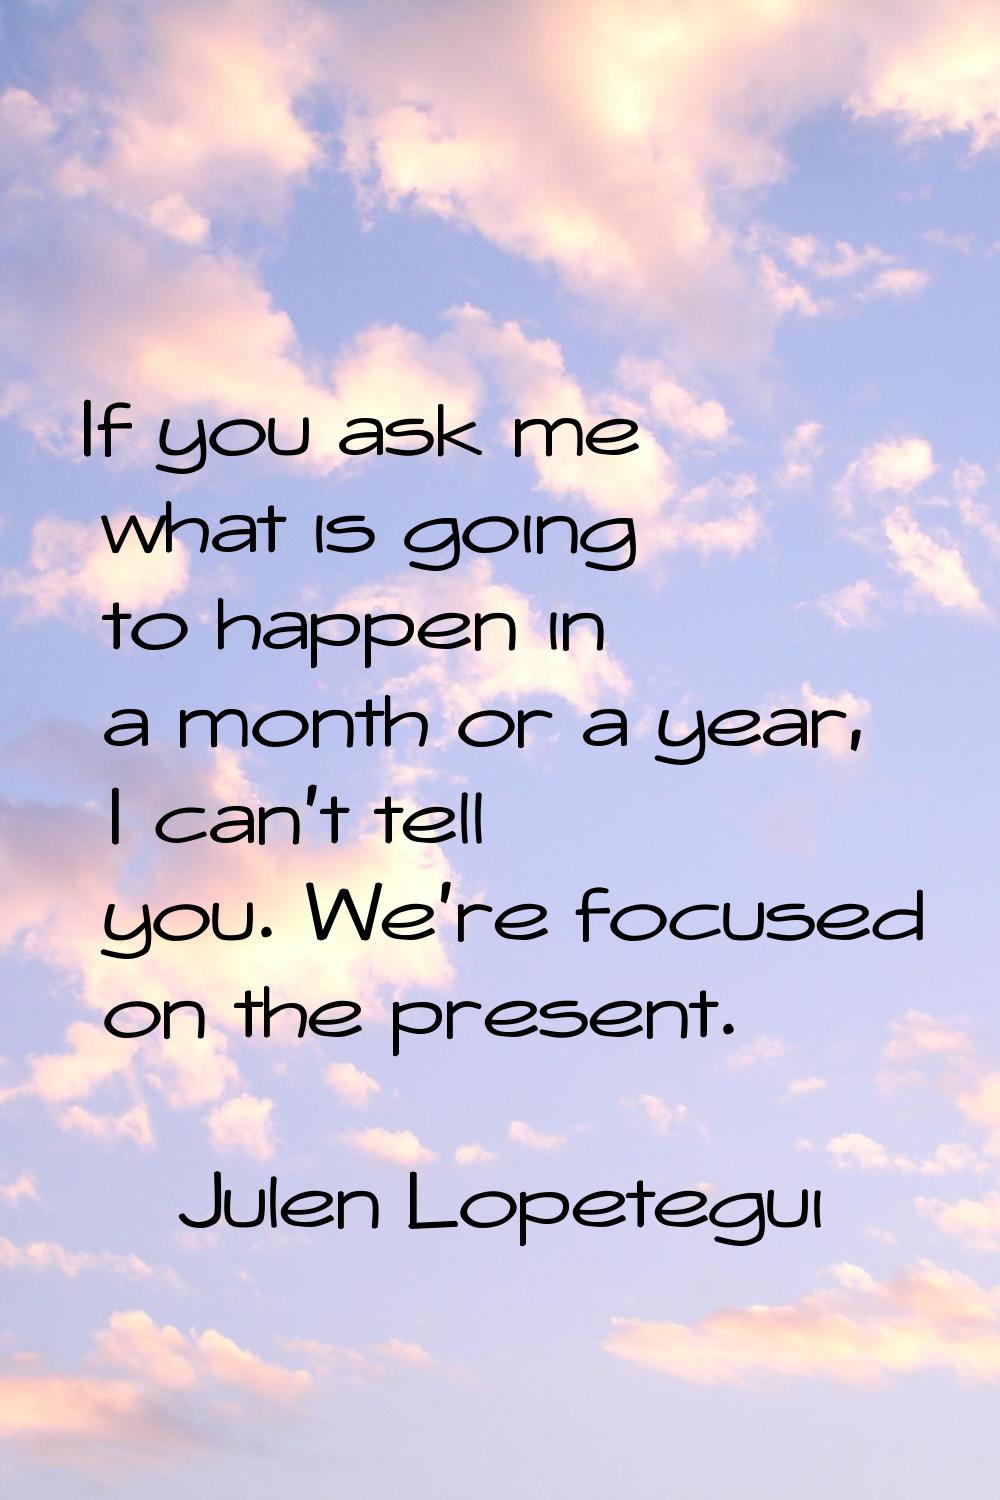 If you ask me what is going to happen in a month or a year, I can't tell you. We're focused on the 